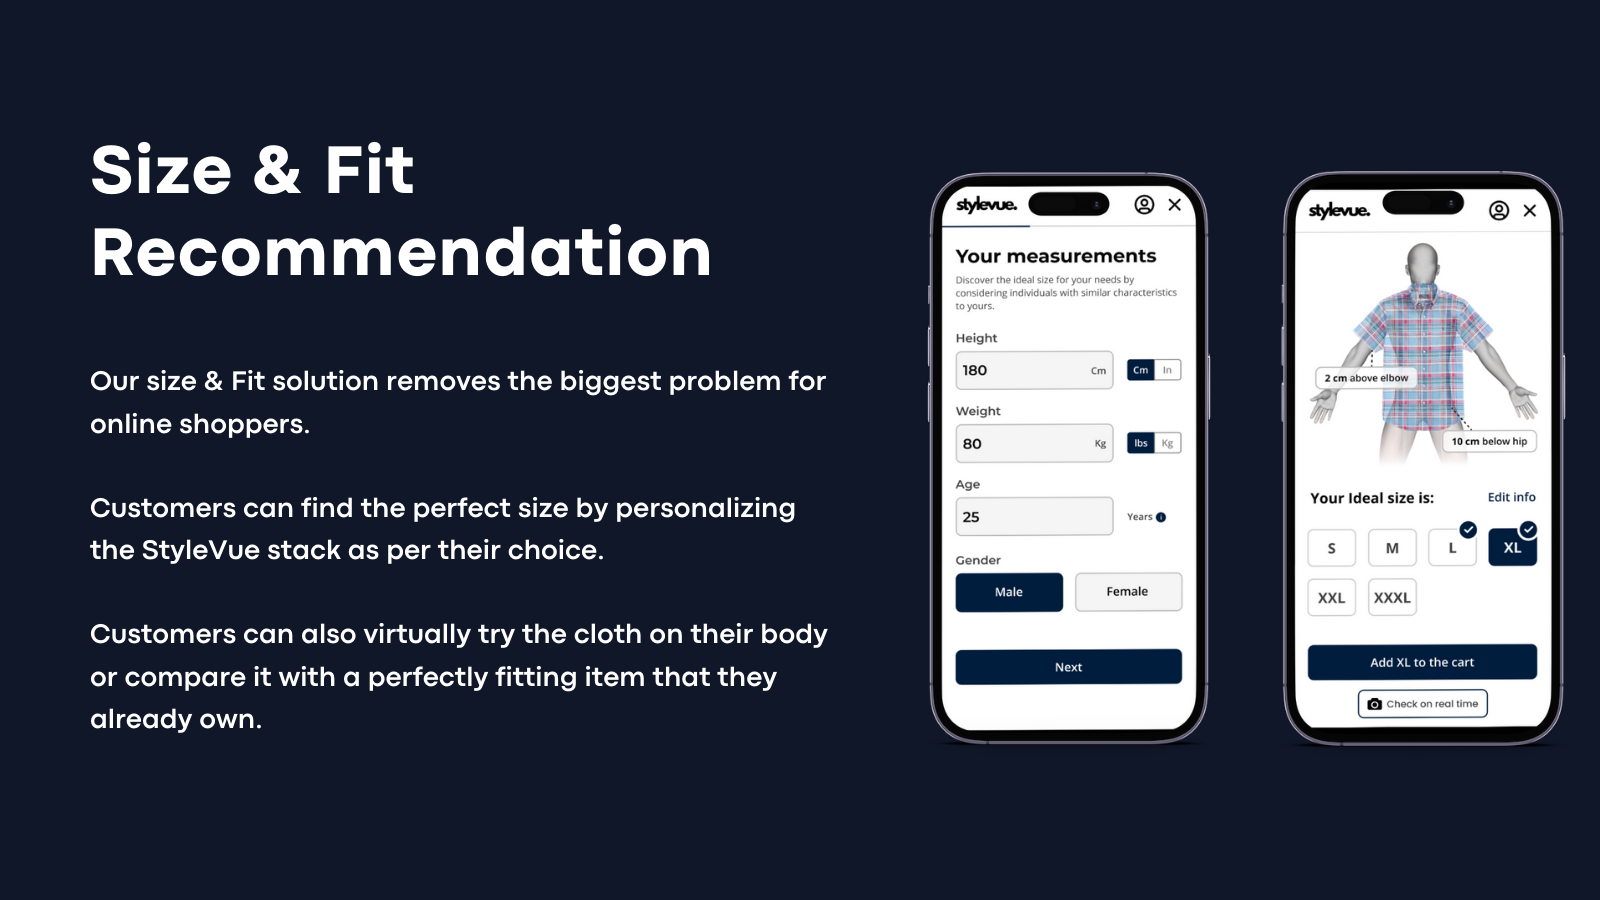 Recommendation Tool